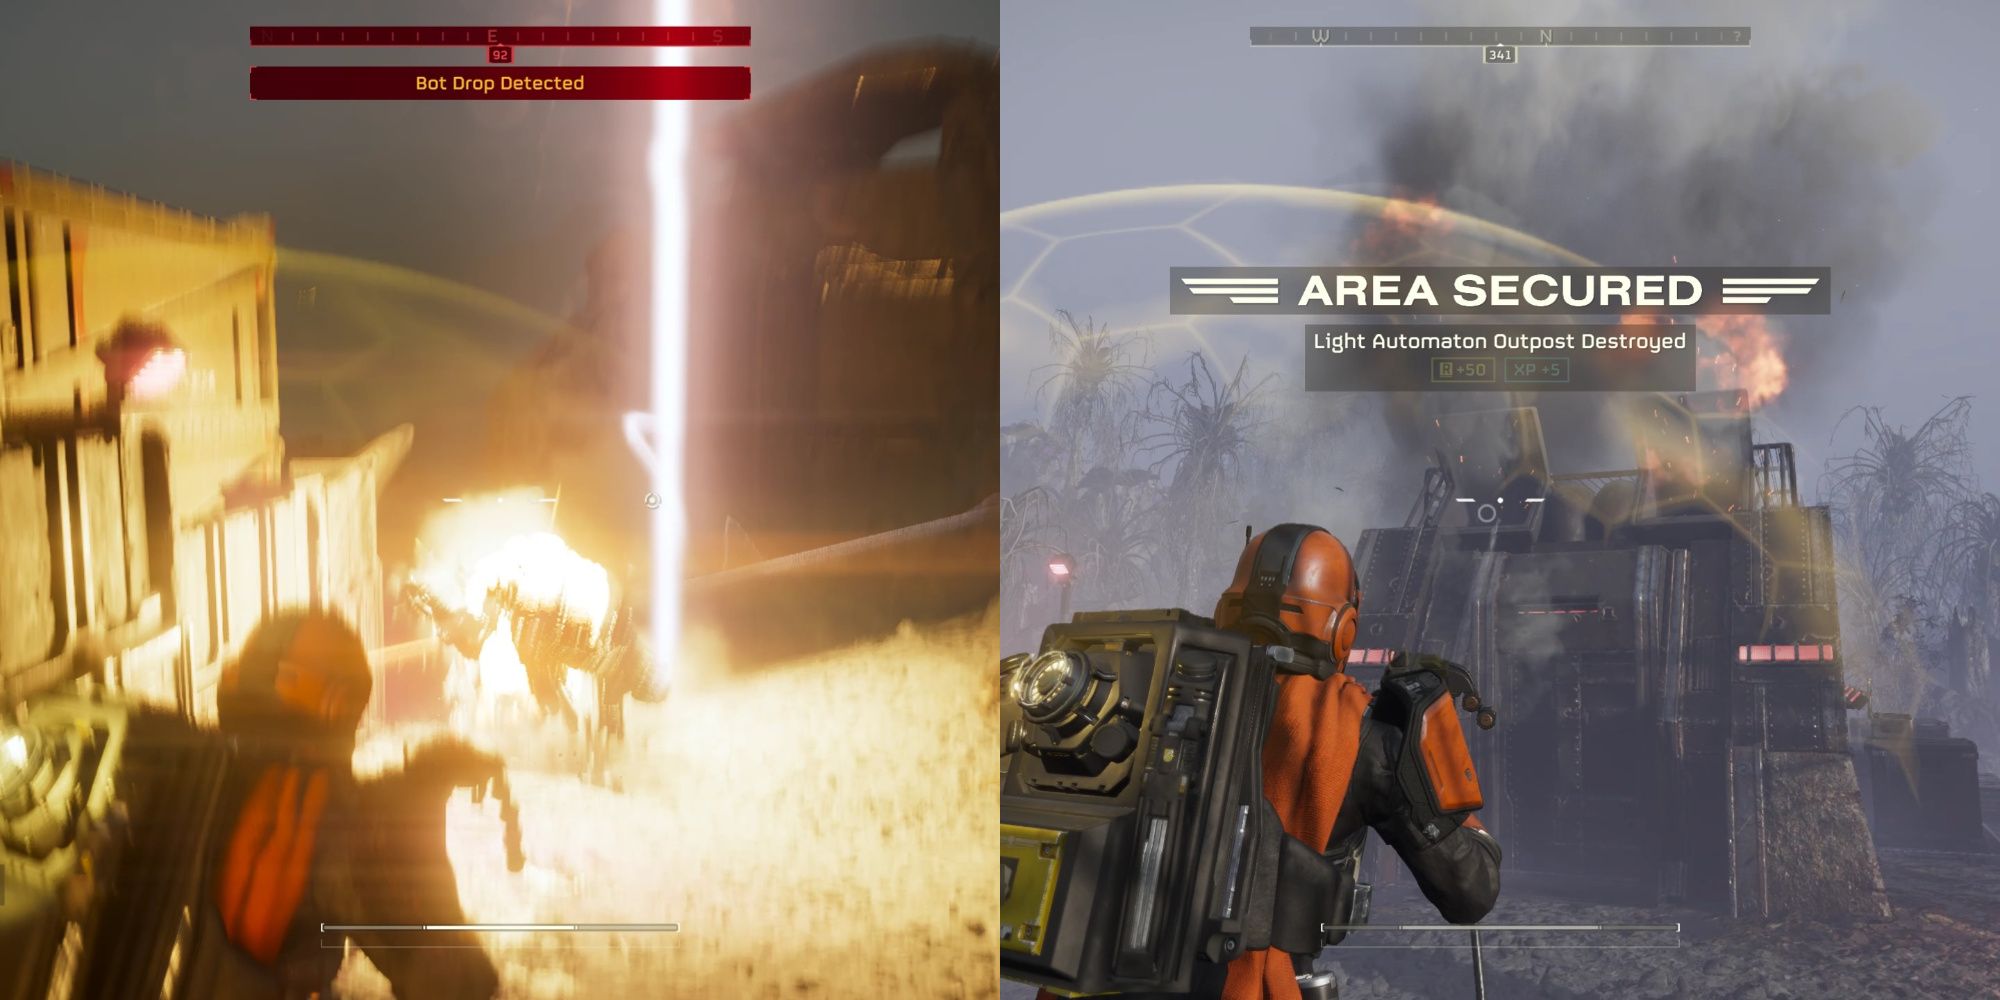 The Grenade Launcher blows up advancing bots (left), blows up a Bot Fabricator (right)